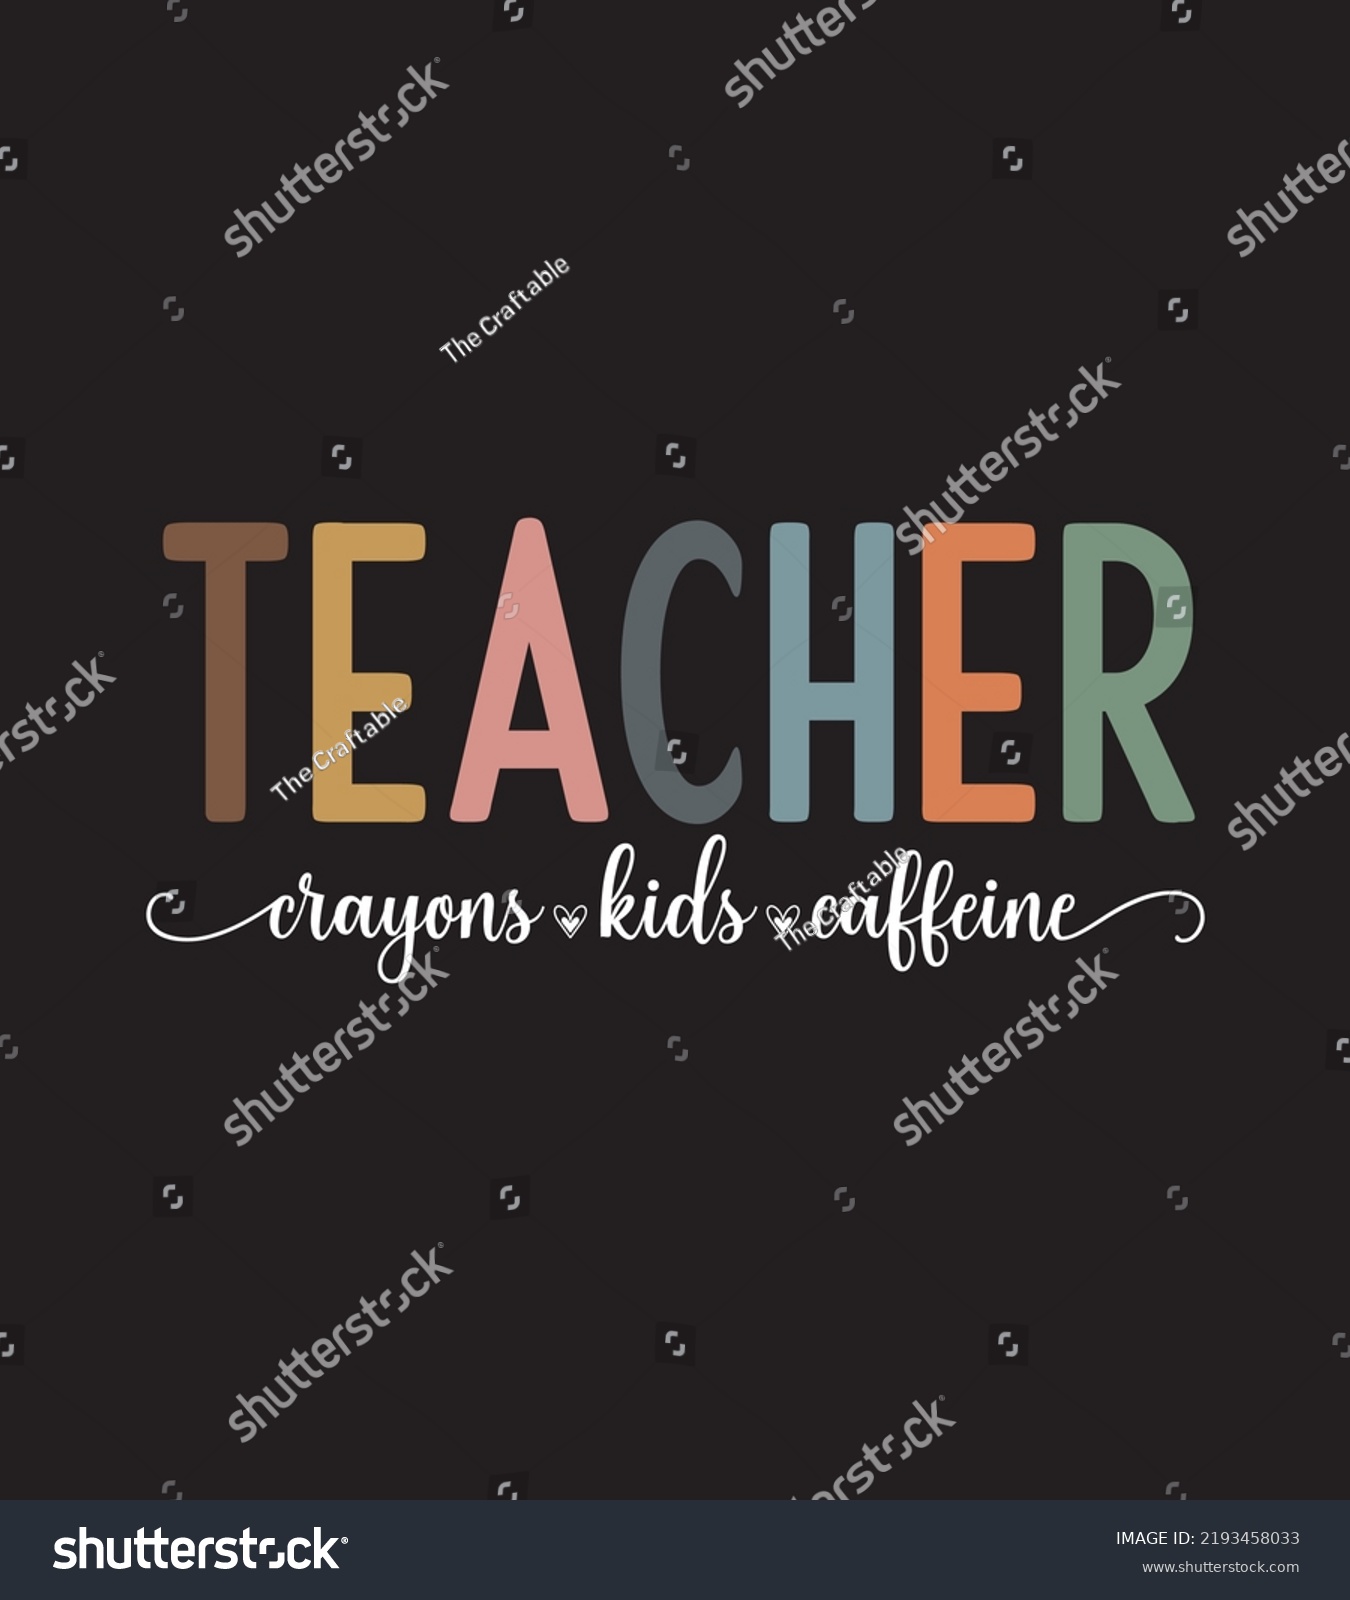 SVG of Teacher SVG Design Perfect For T-shirt And Others svg